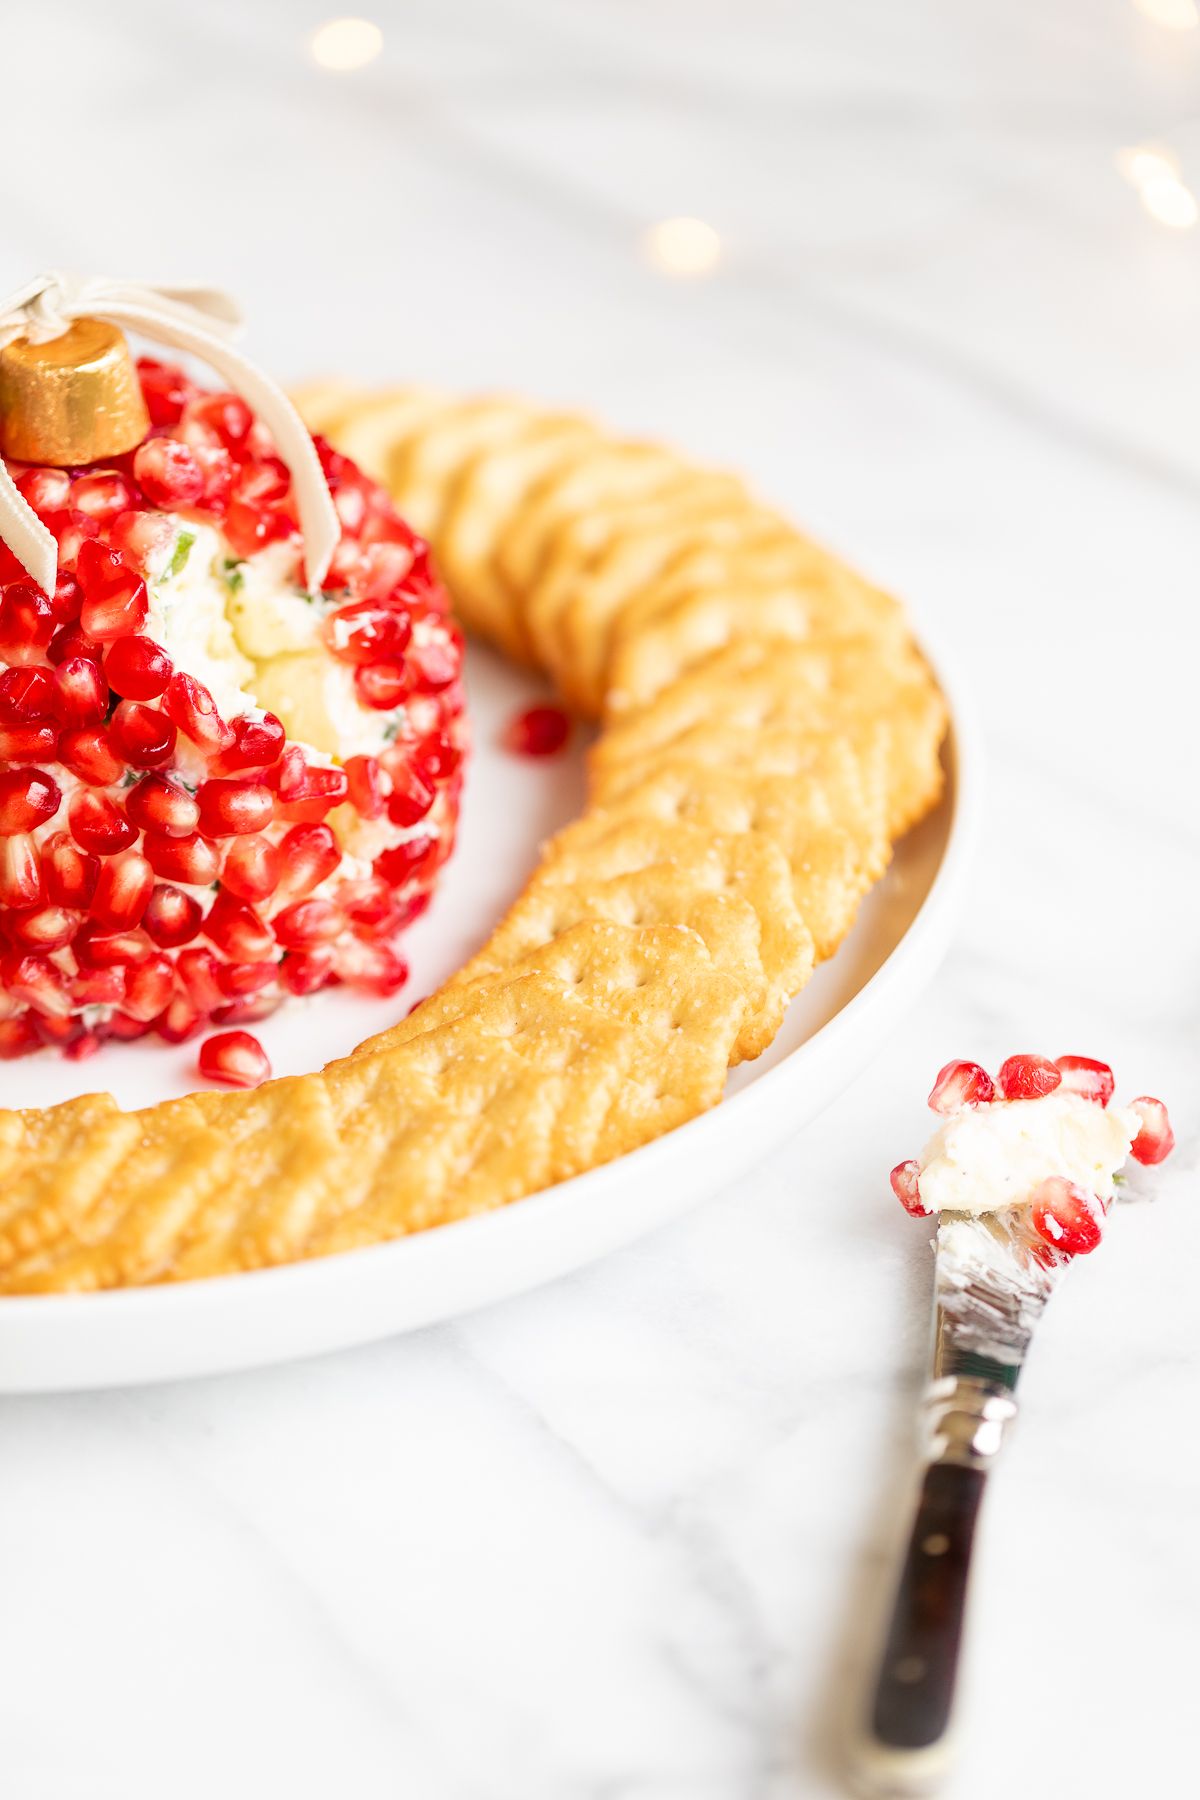 A pomegranate Christmas cheese ball shaped into an ornament, surrounded by crackers on a round white plate.